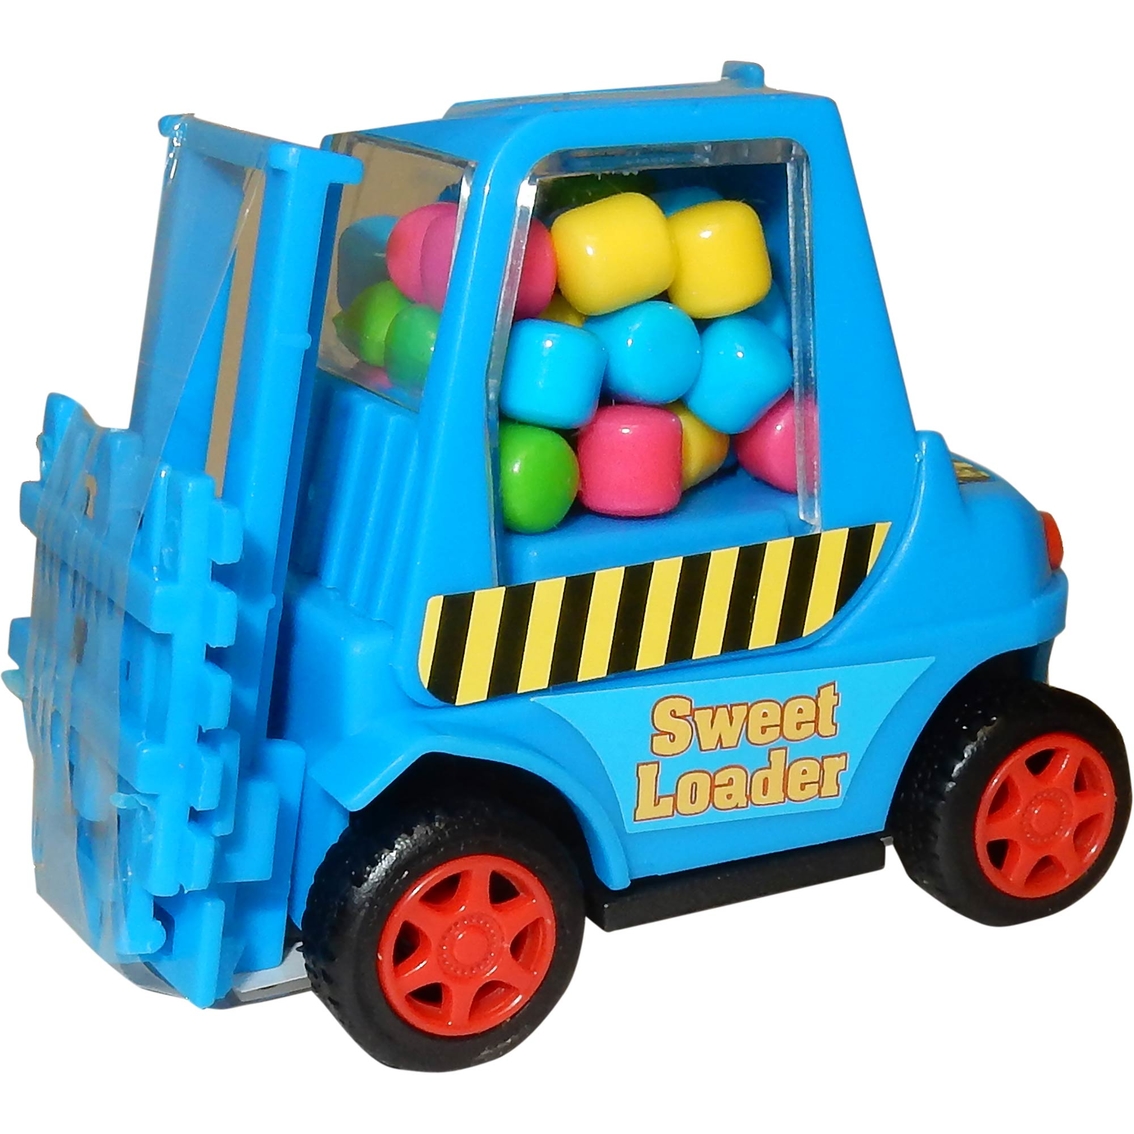 Kidsmania Sweet Loader Toy with Candy 12 pk. - Image 2 of 2